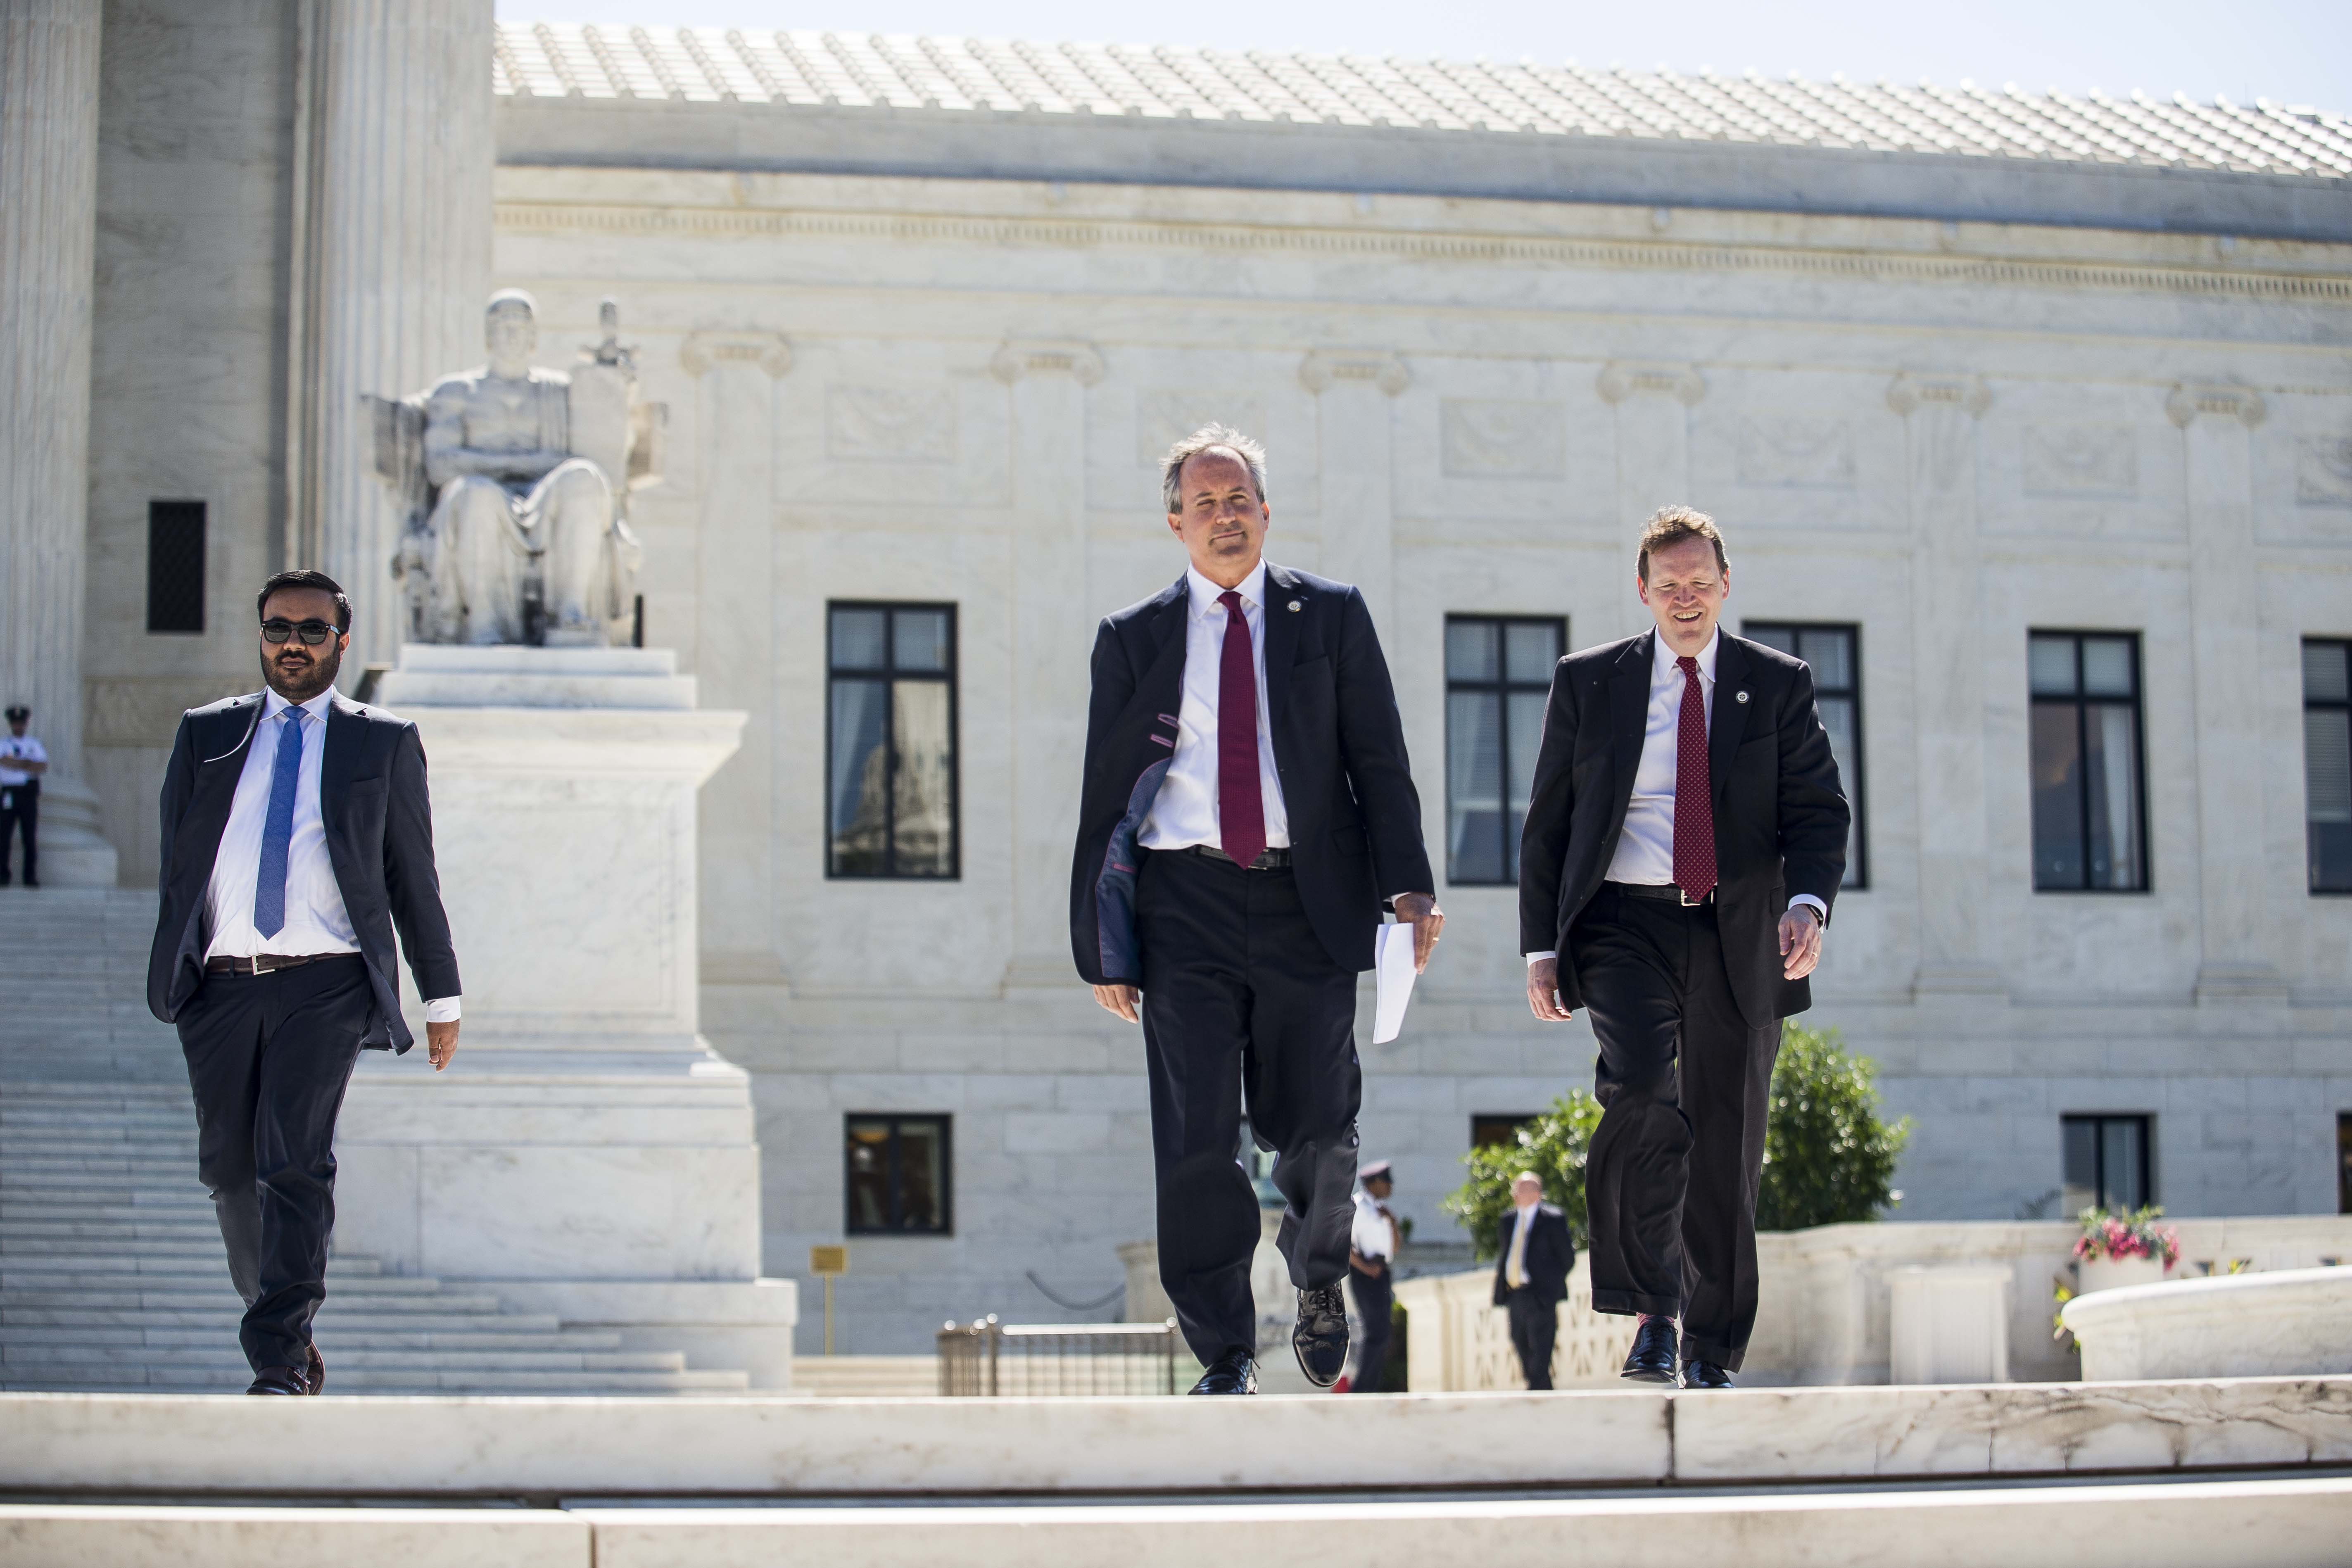 Texas Attorney General Ken Paxton (C) walks to a news conference outside the Supreme Court on Capitol Hill on June 9, 2016 in Washington, D.C. Paxton announced a lawsuit against the state of Delaware over unclaimed checks. (Gabriella Demczuk/Getty Images)